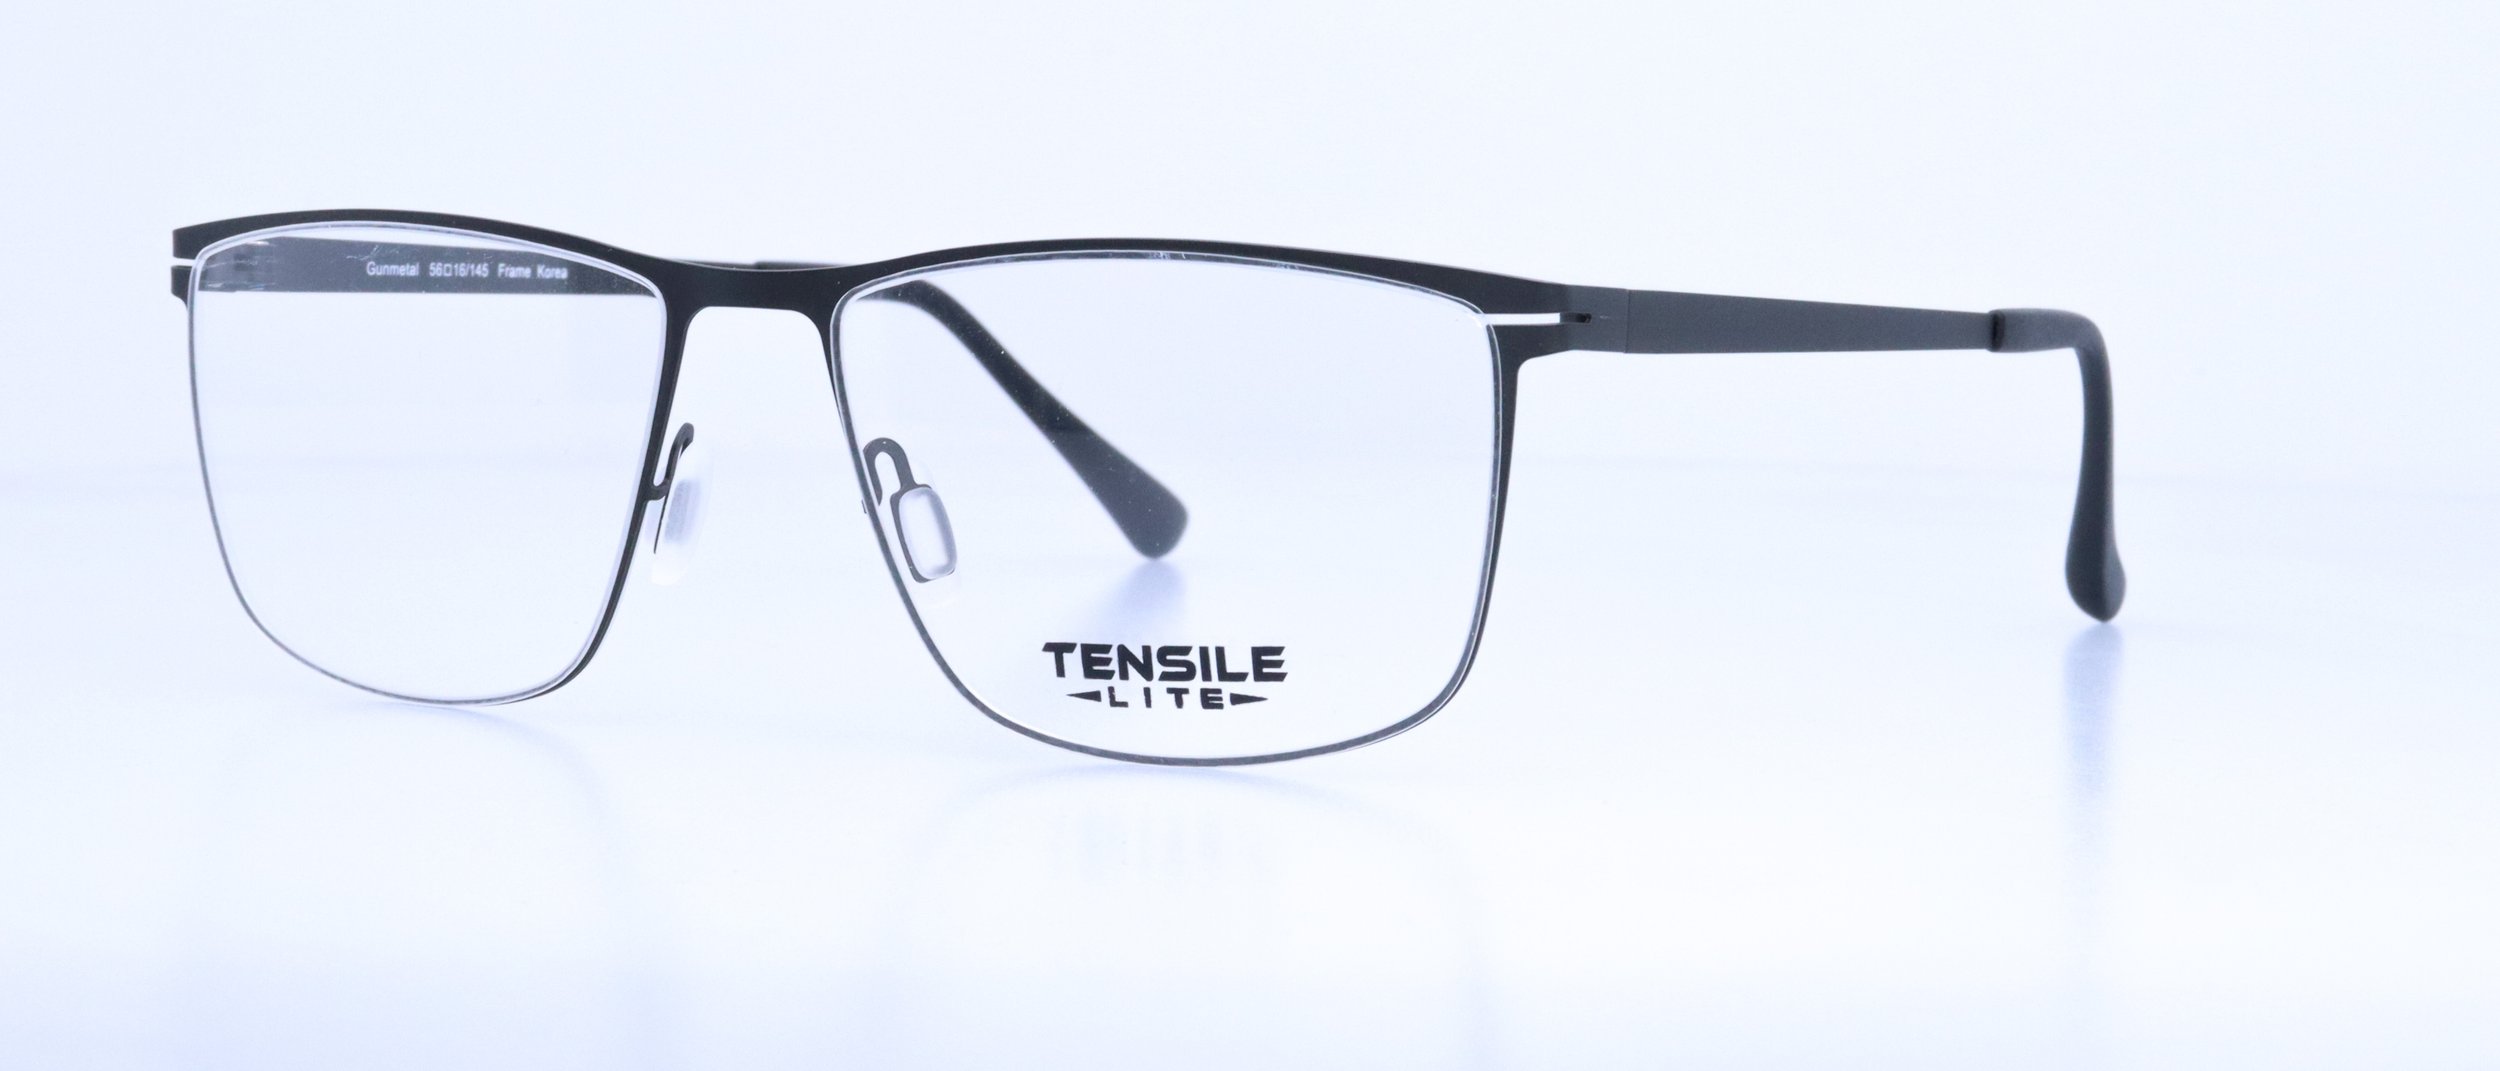  NEW!!! TL715: 56-16-145, Available in Black or Gunmetal 